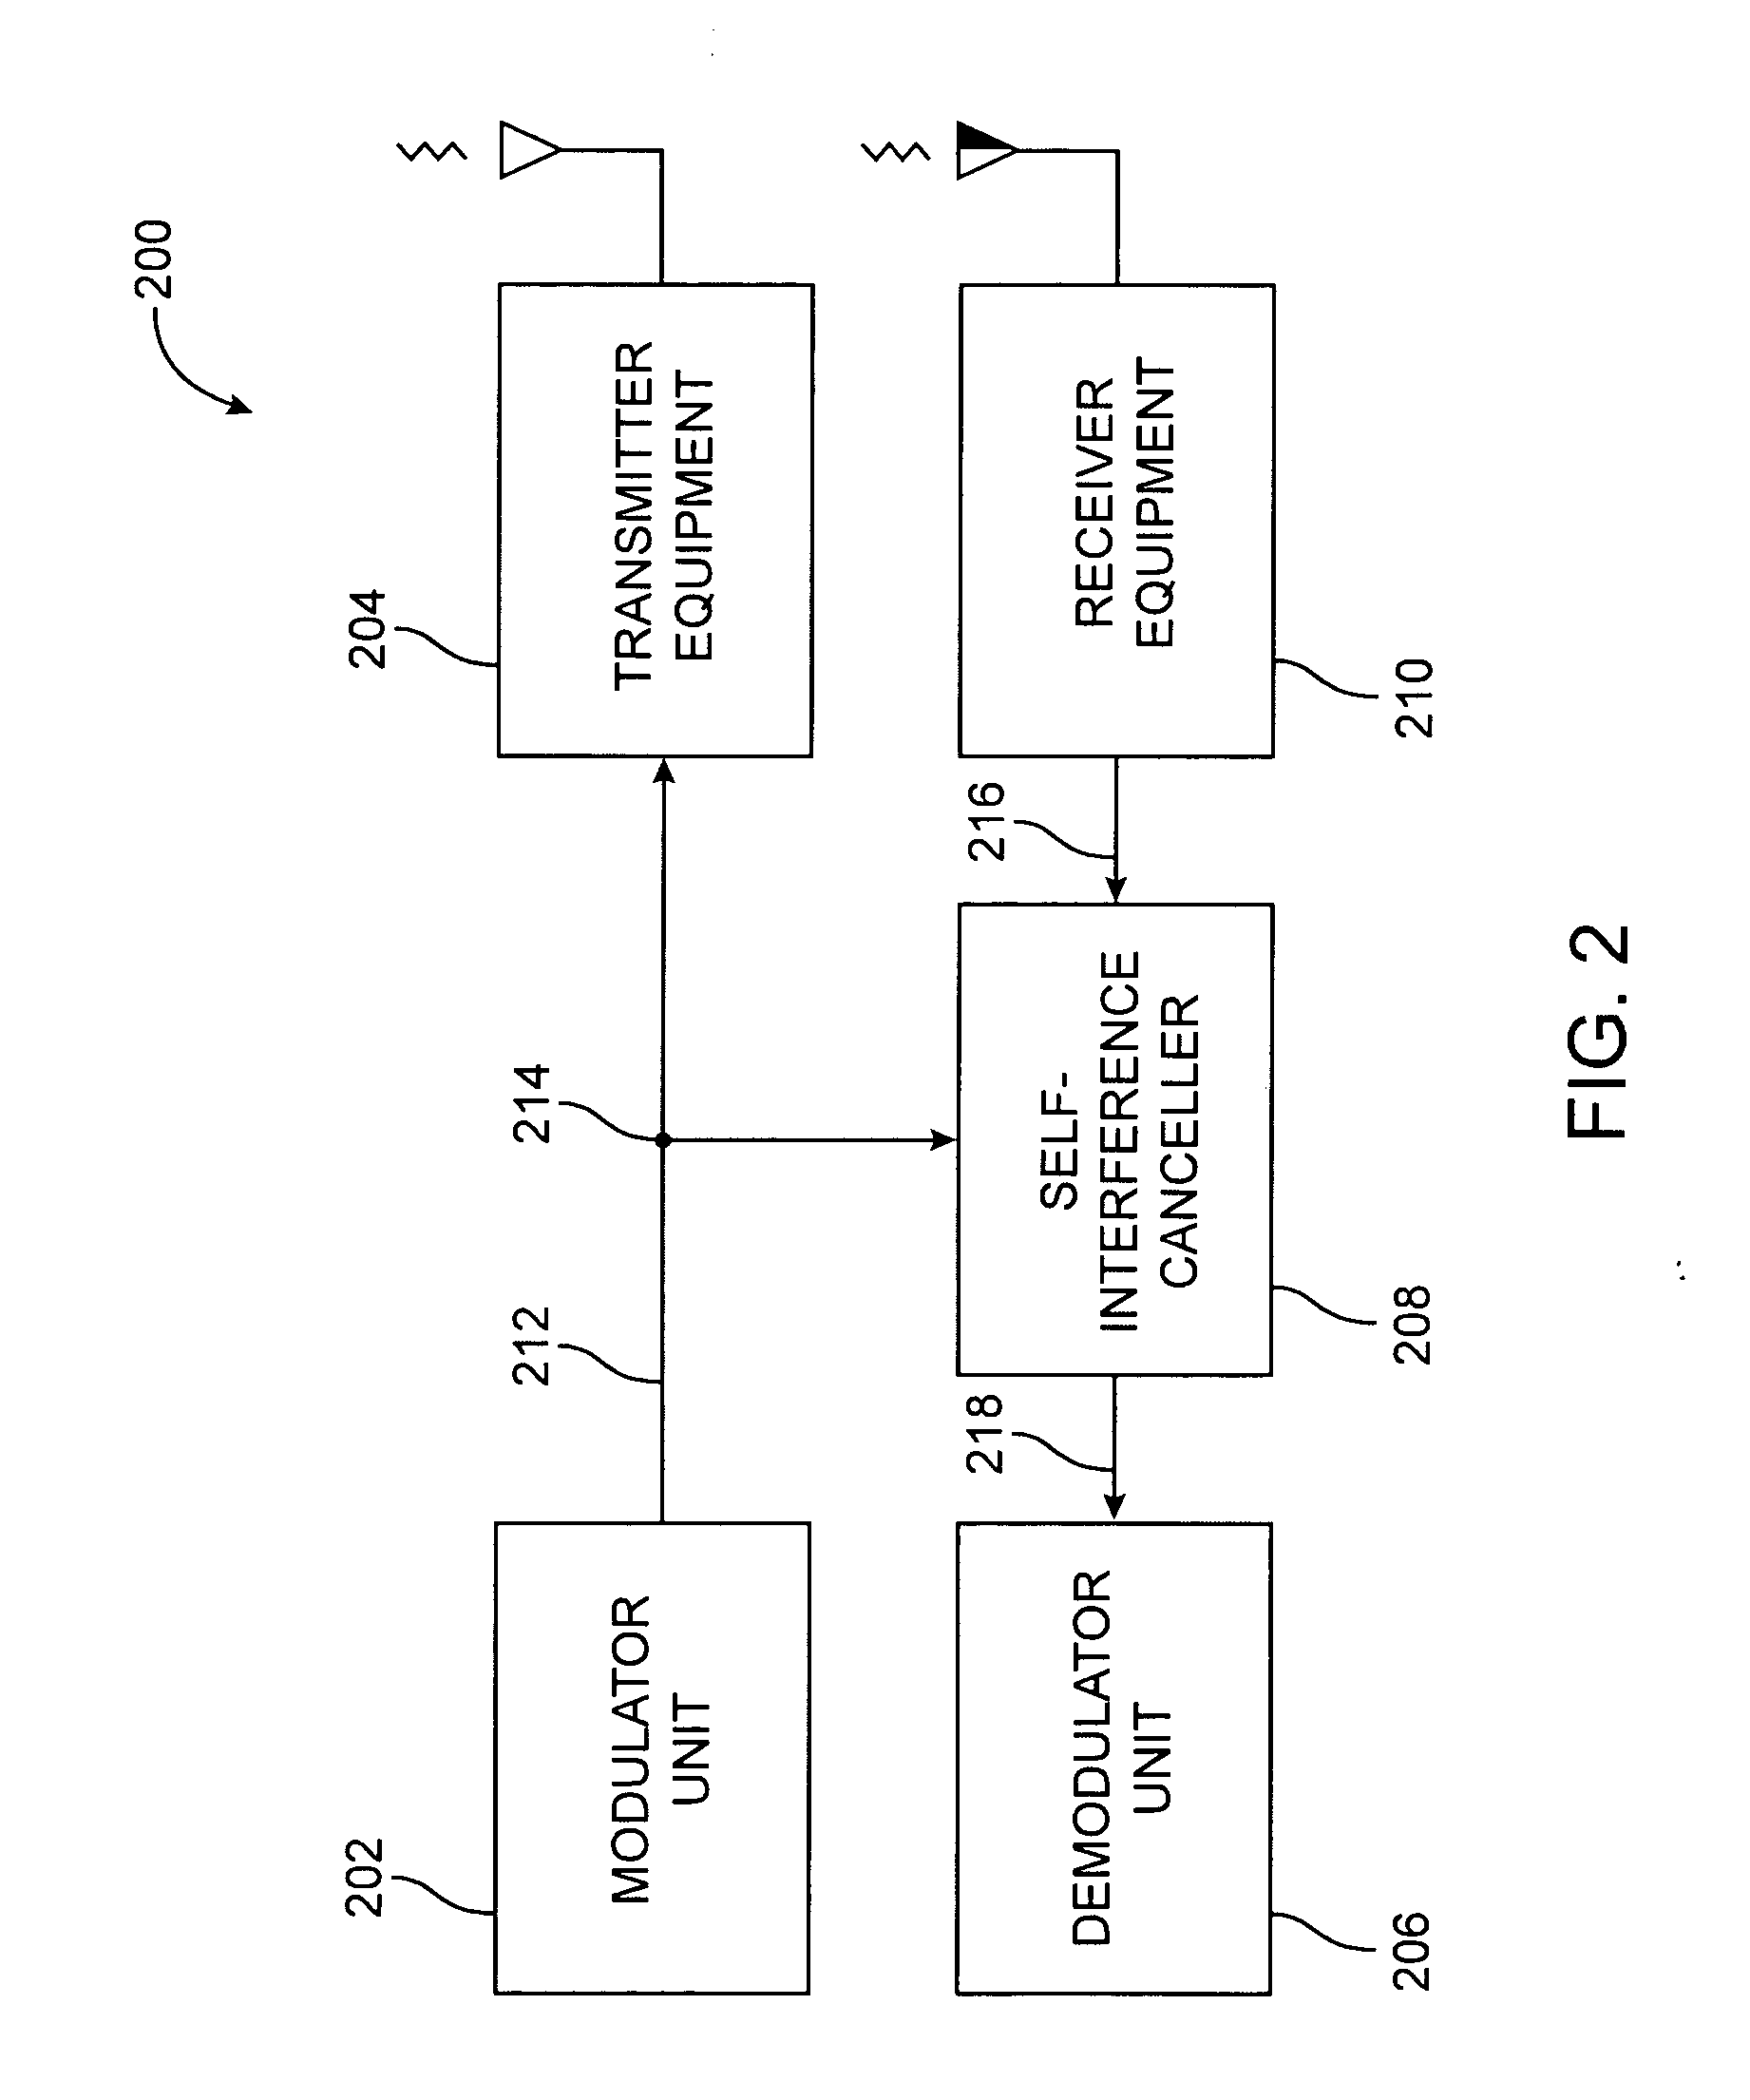 Relayed communication with versatile self-interference cancellation